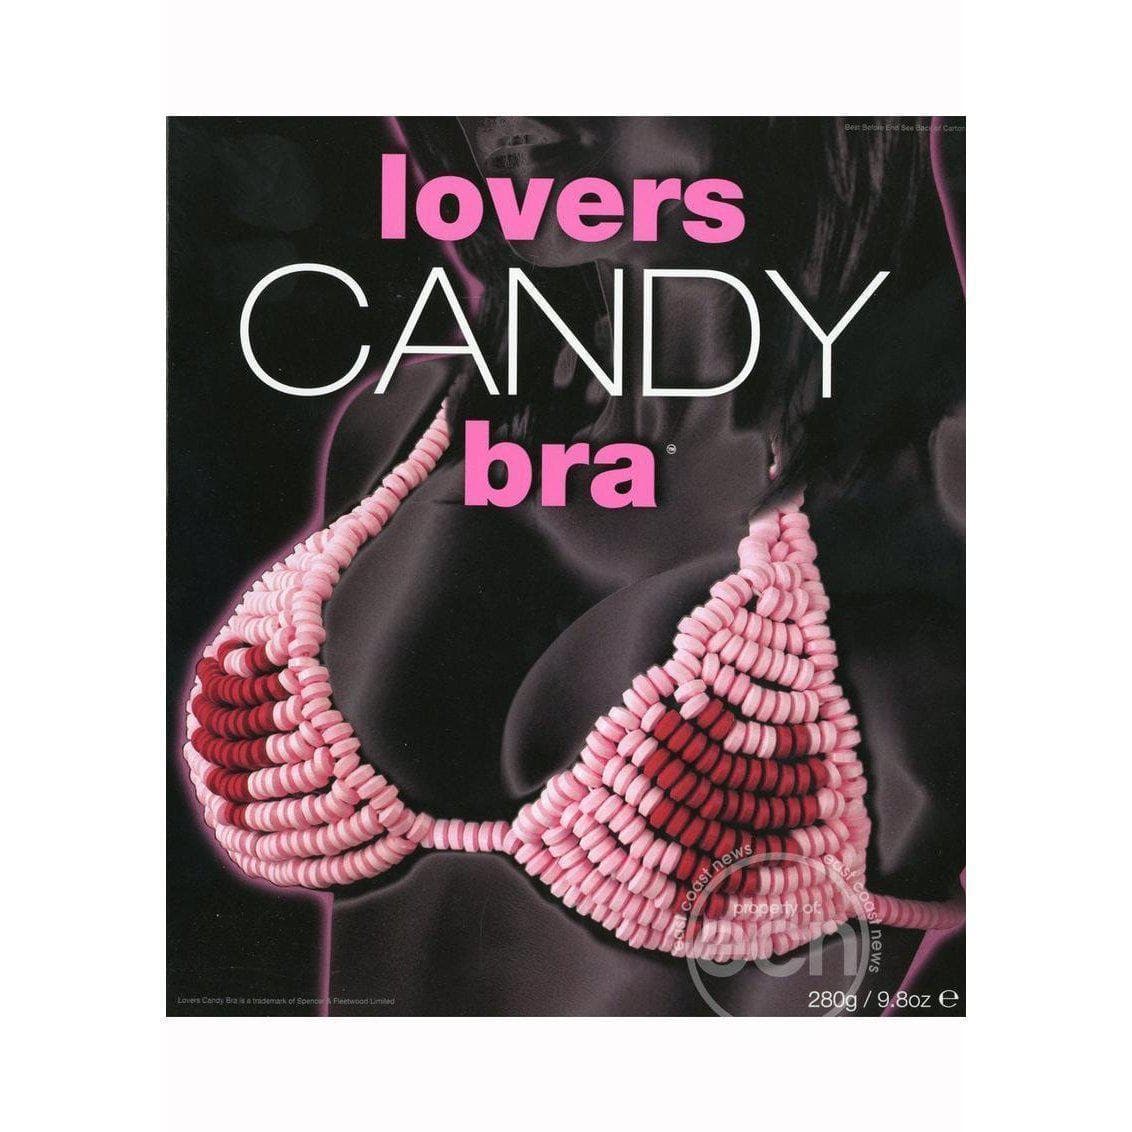 Buy Edible Candy Lingerie Gift Set- Candy Necklace Style Bra Candy